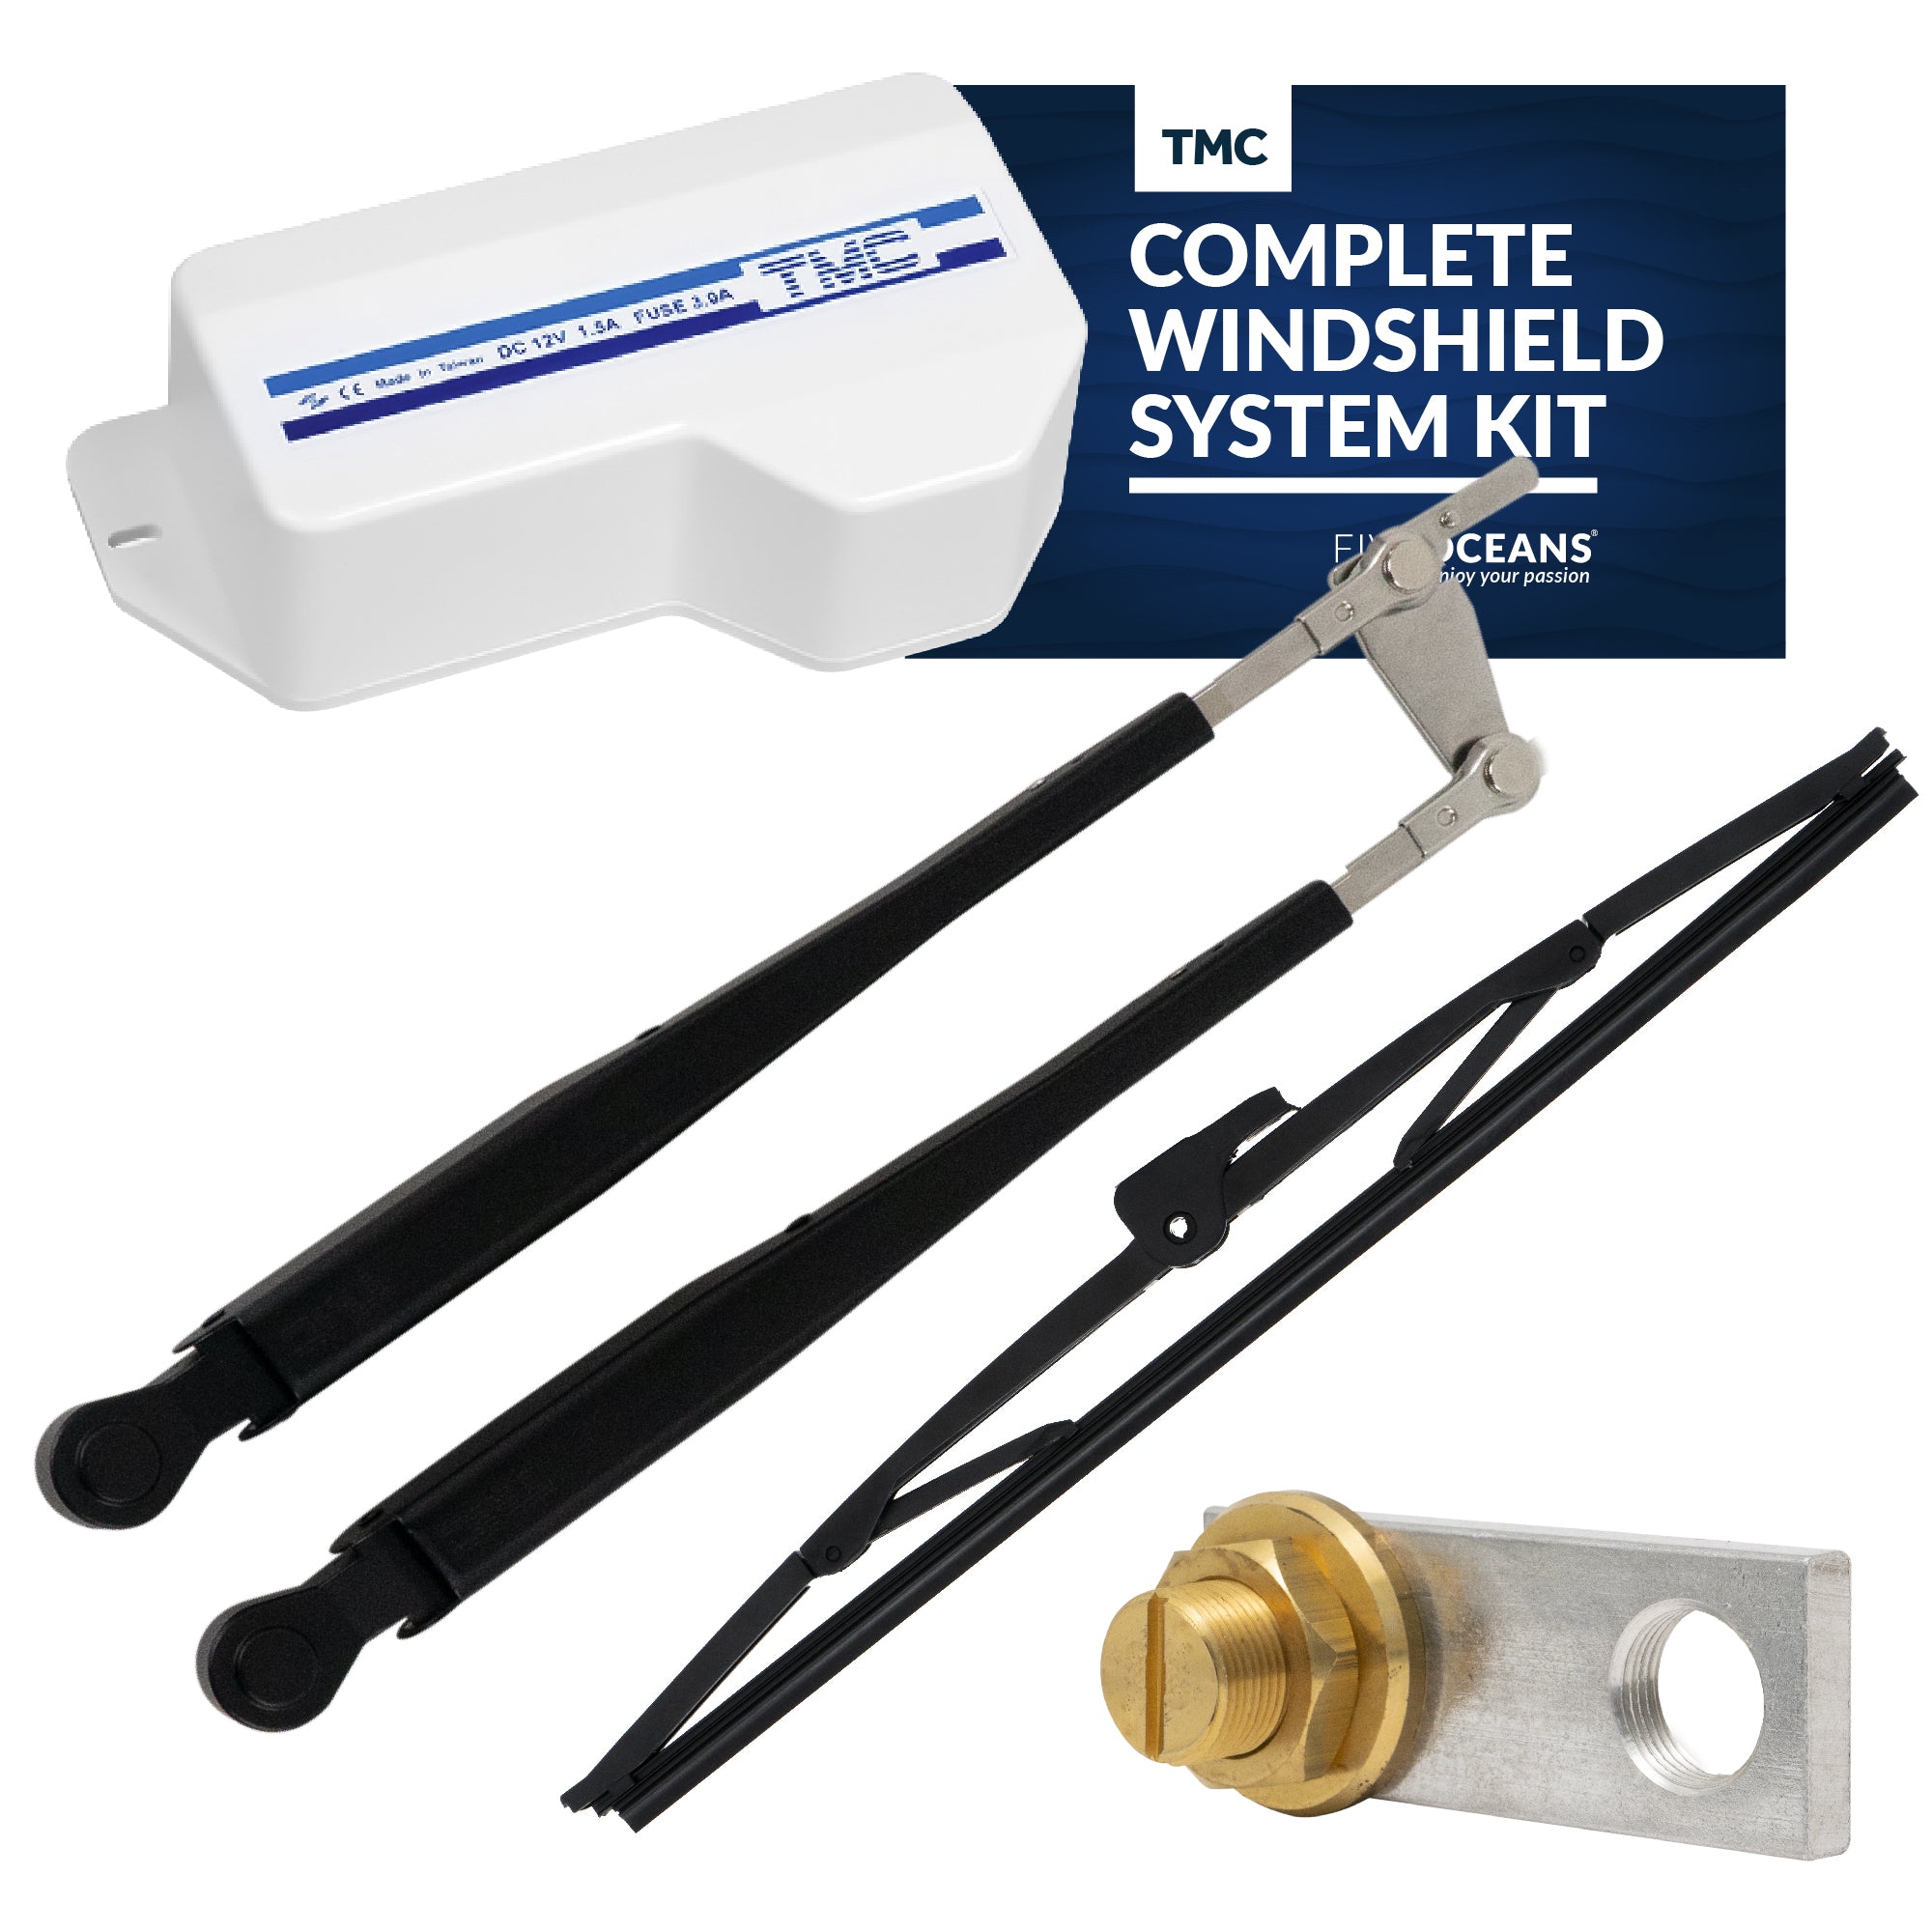 TMC Complete Windshield System Kit  - FO746-C8